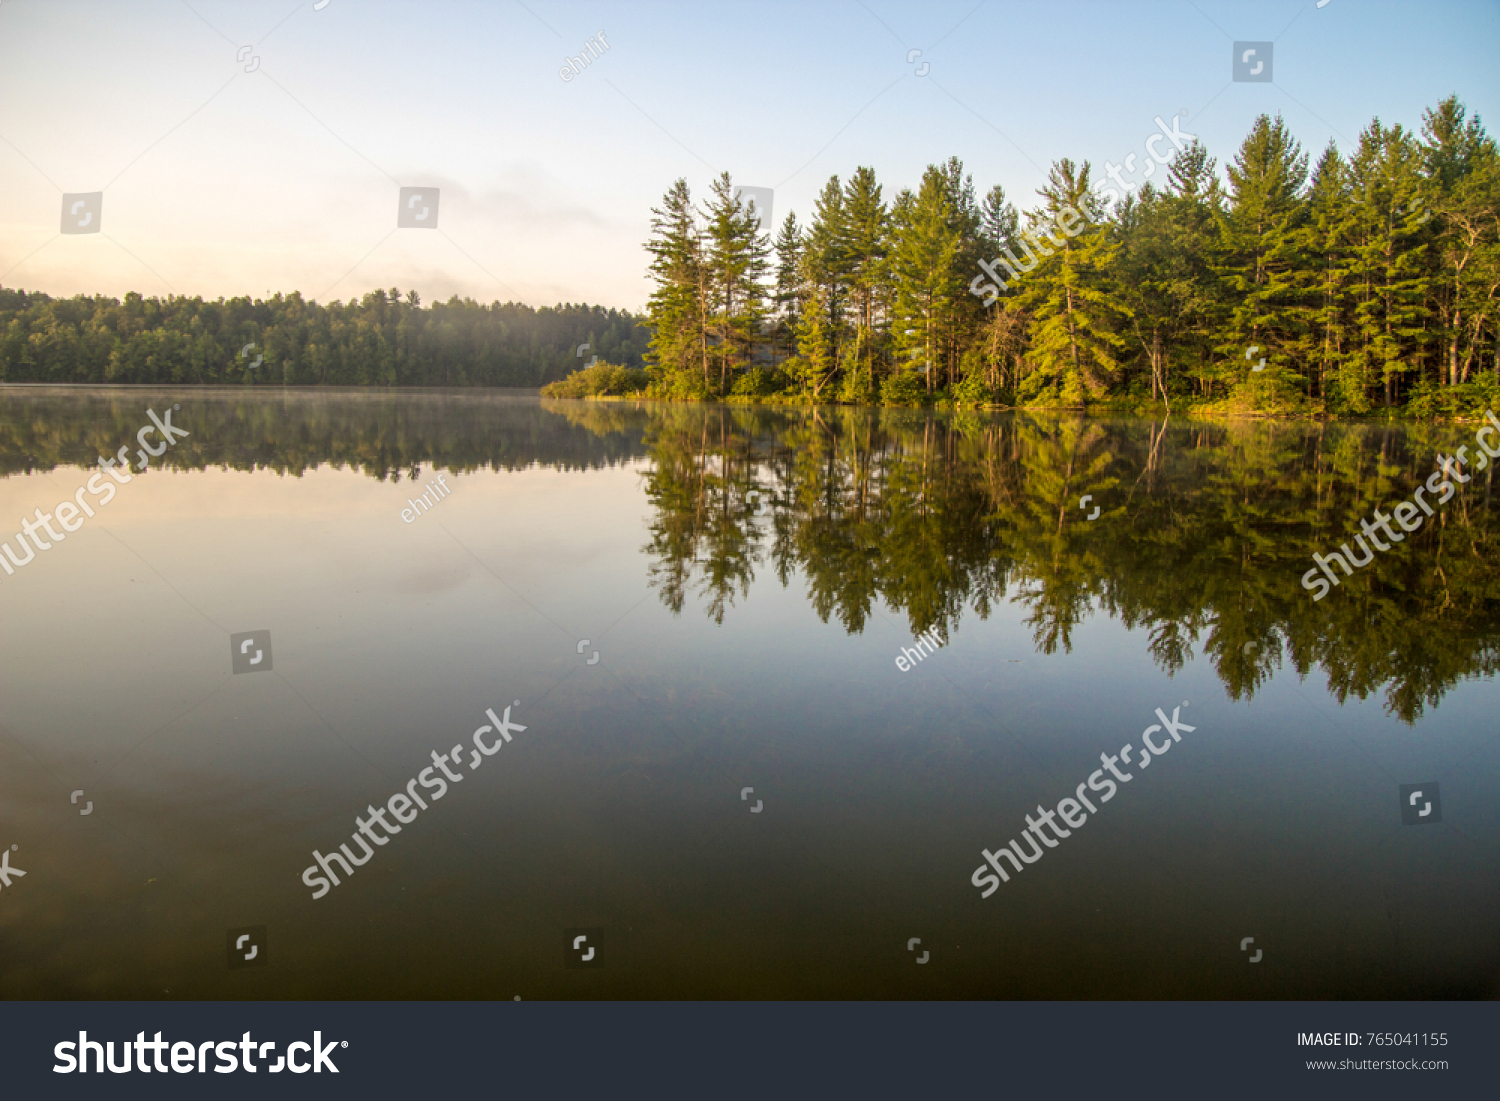 Northern Michigan Wilderness Lake. Wilderness lake with forest reflections in the water and copy space in the foreground in Mio, Michigan.
 #765041155